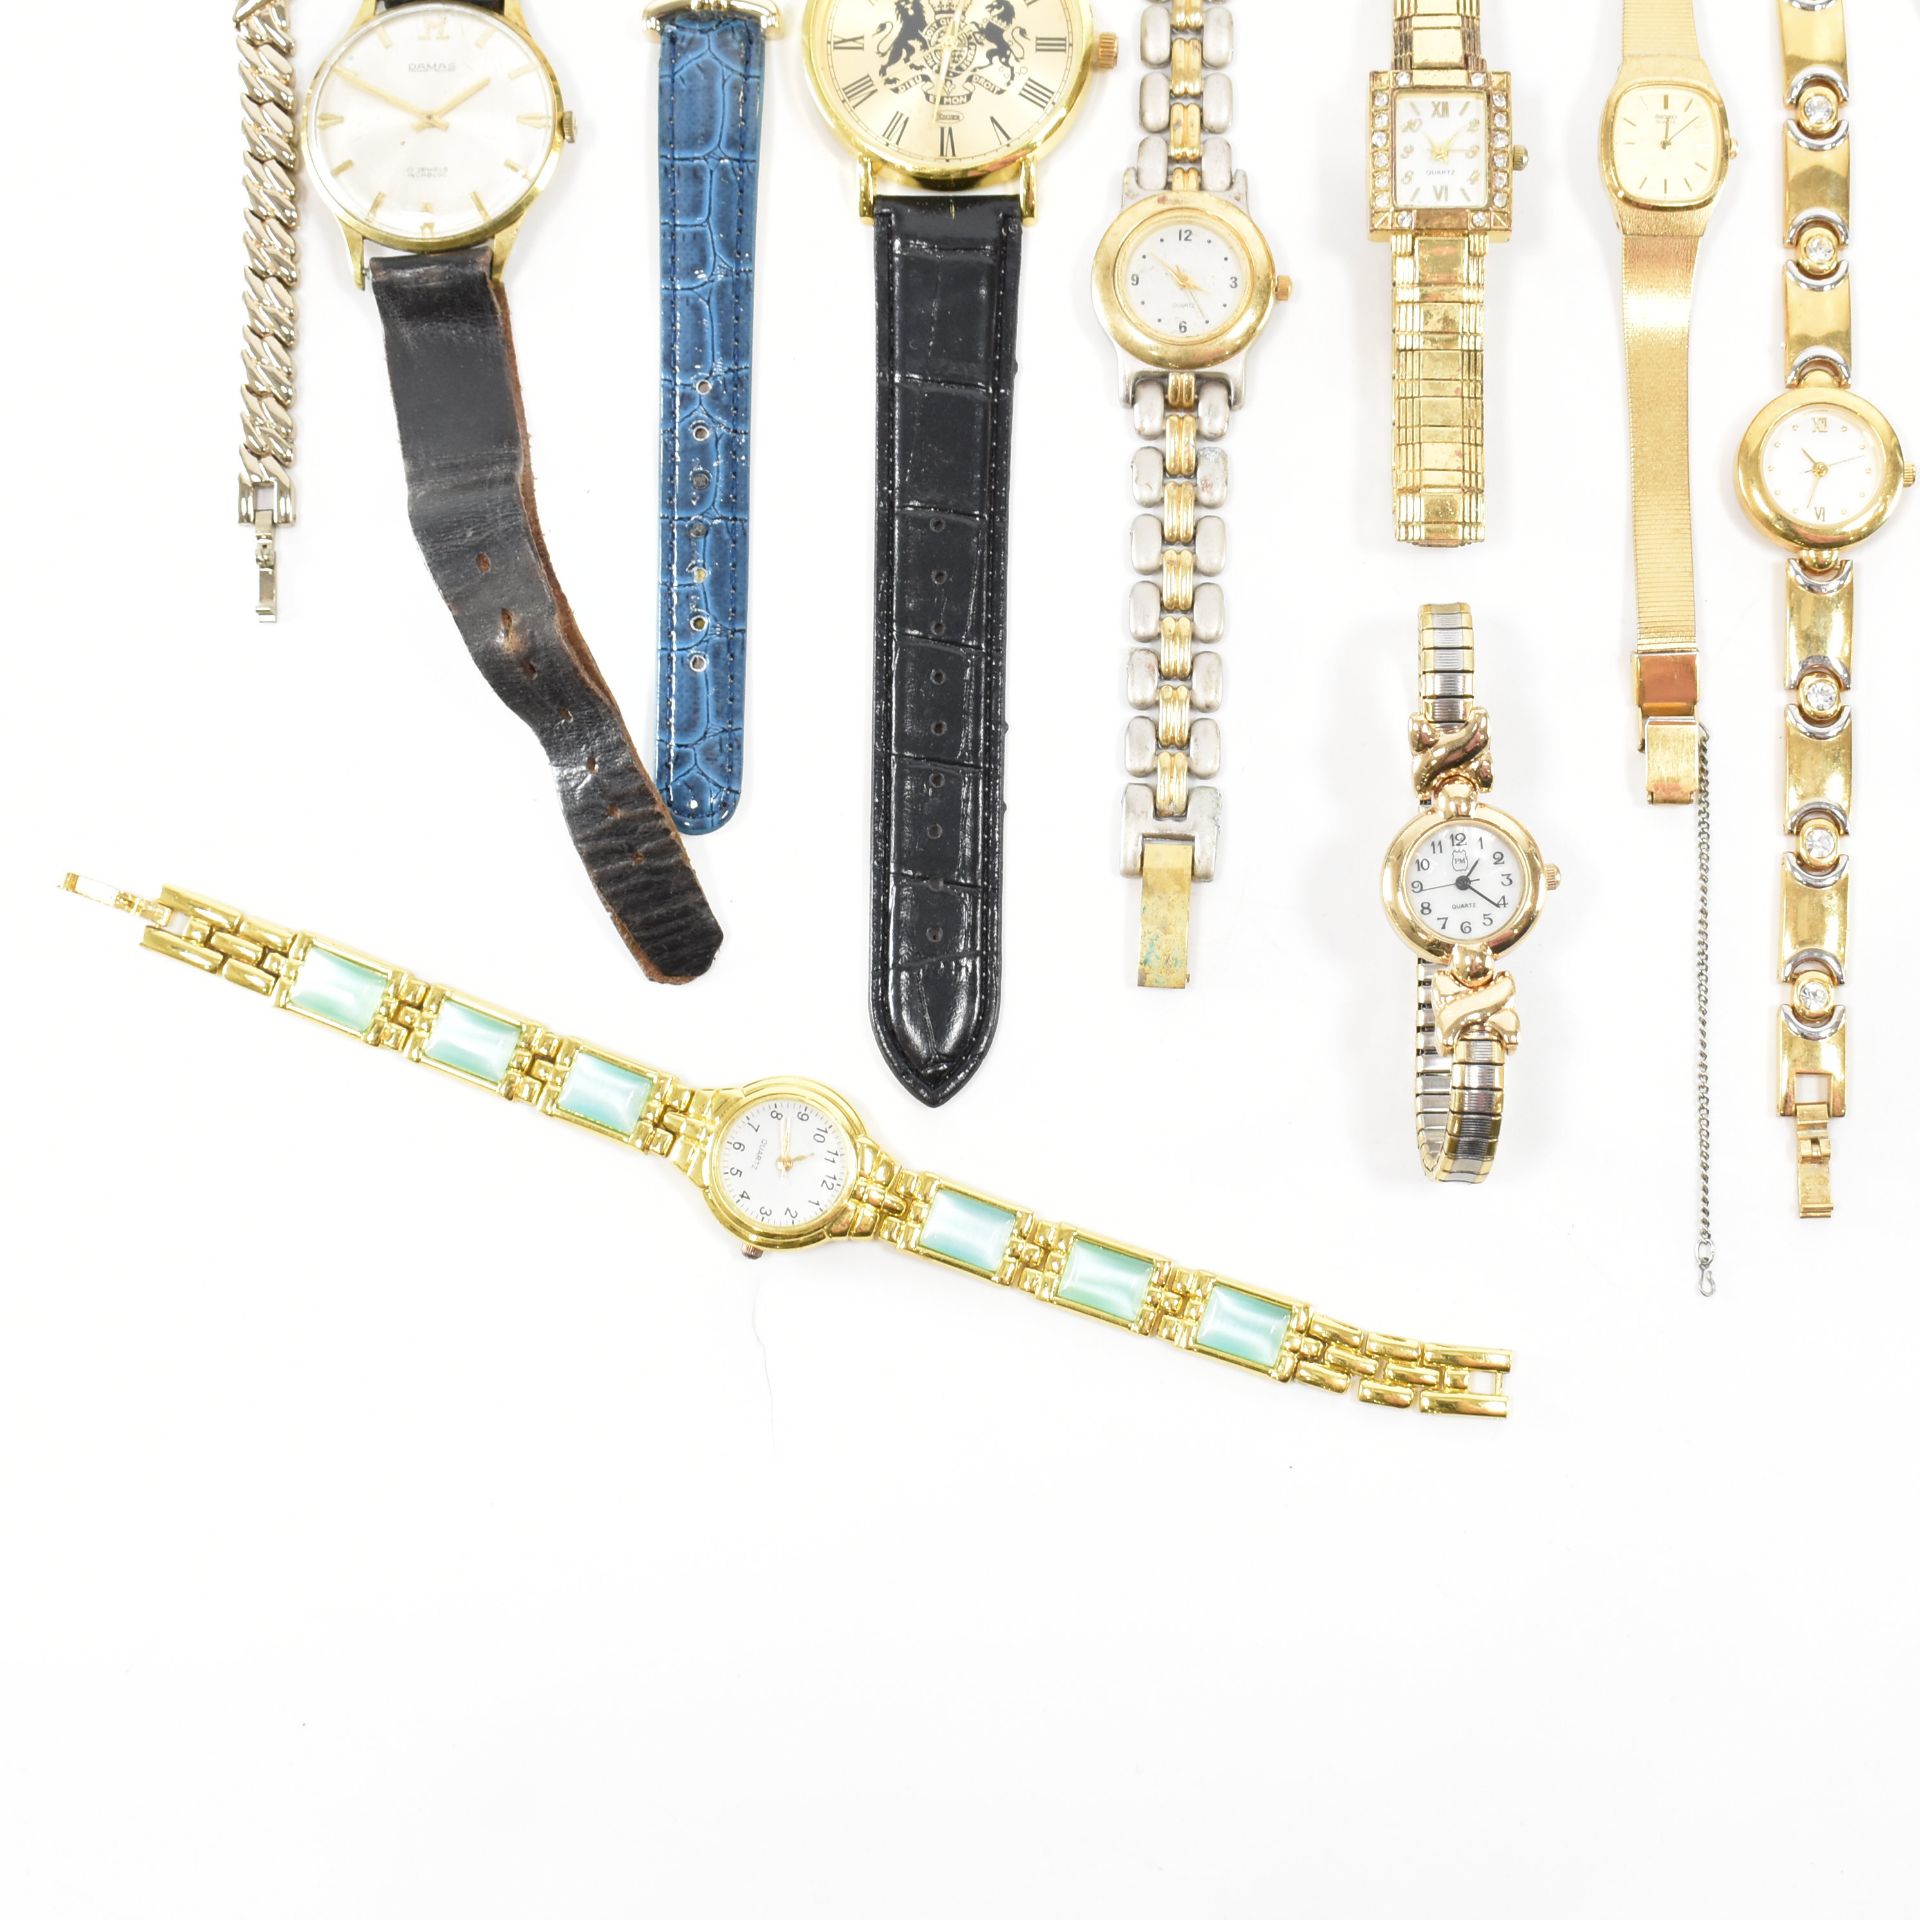 COLLECTION OF WRIST WATCHES - Image 4 of 5